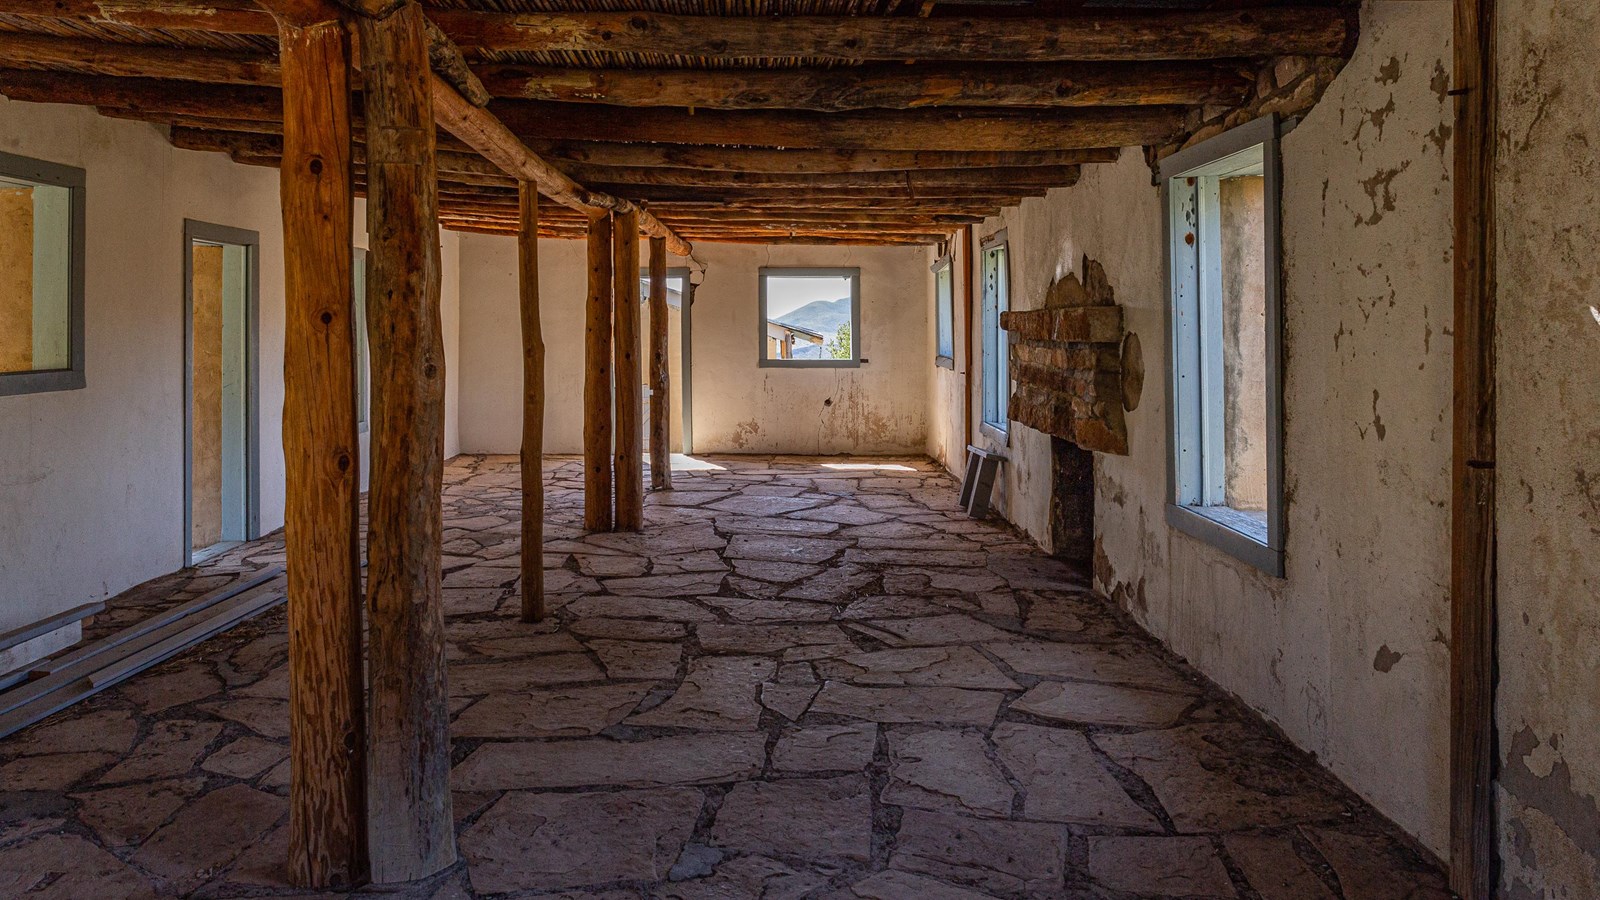 Interior of line camp with flagstone floor, reed ceiling, and white-washed stucco walls.